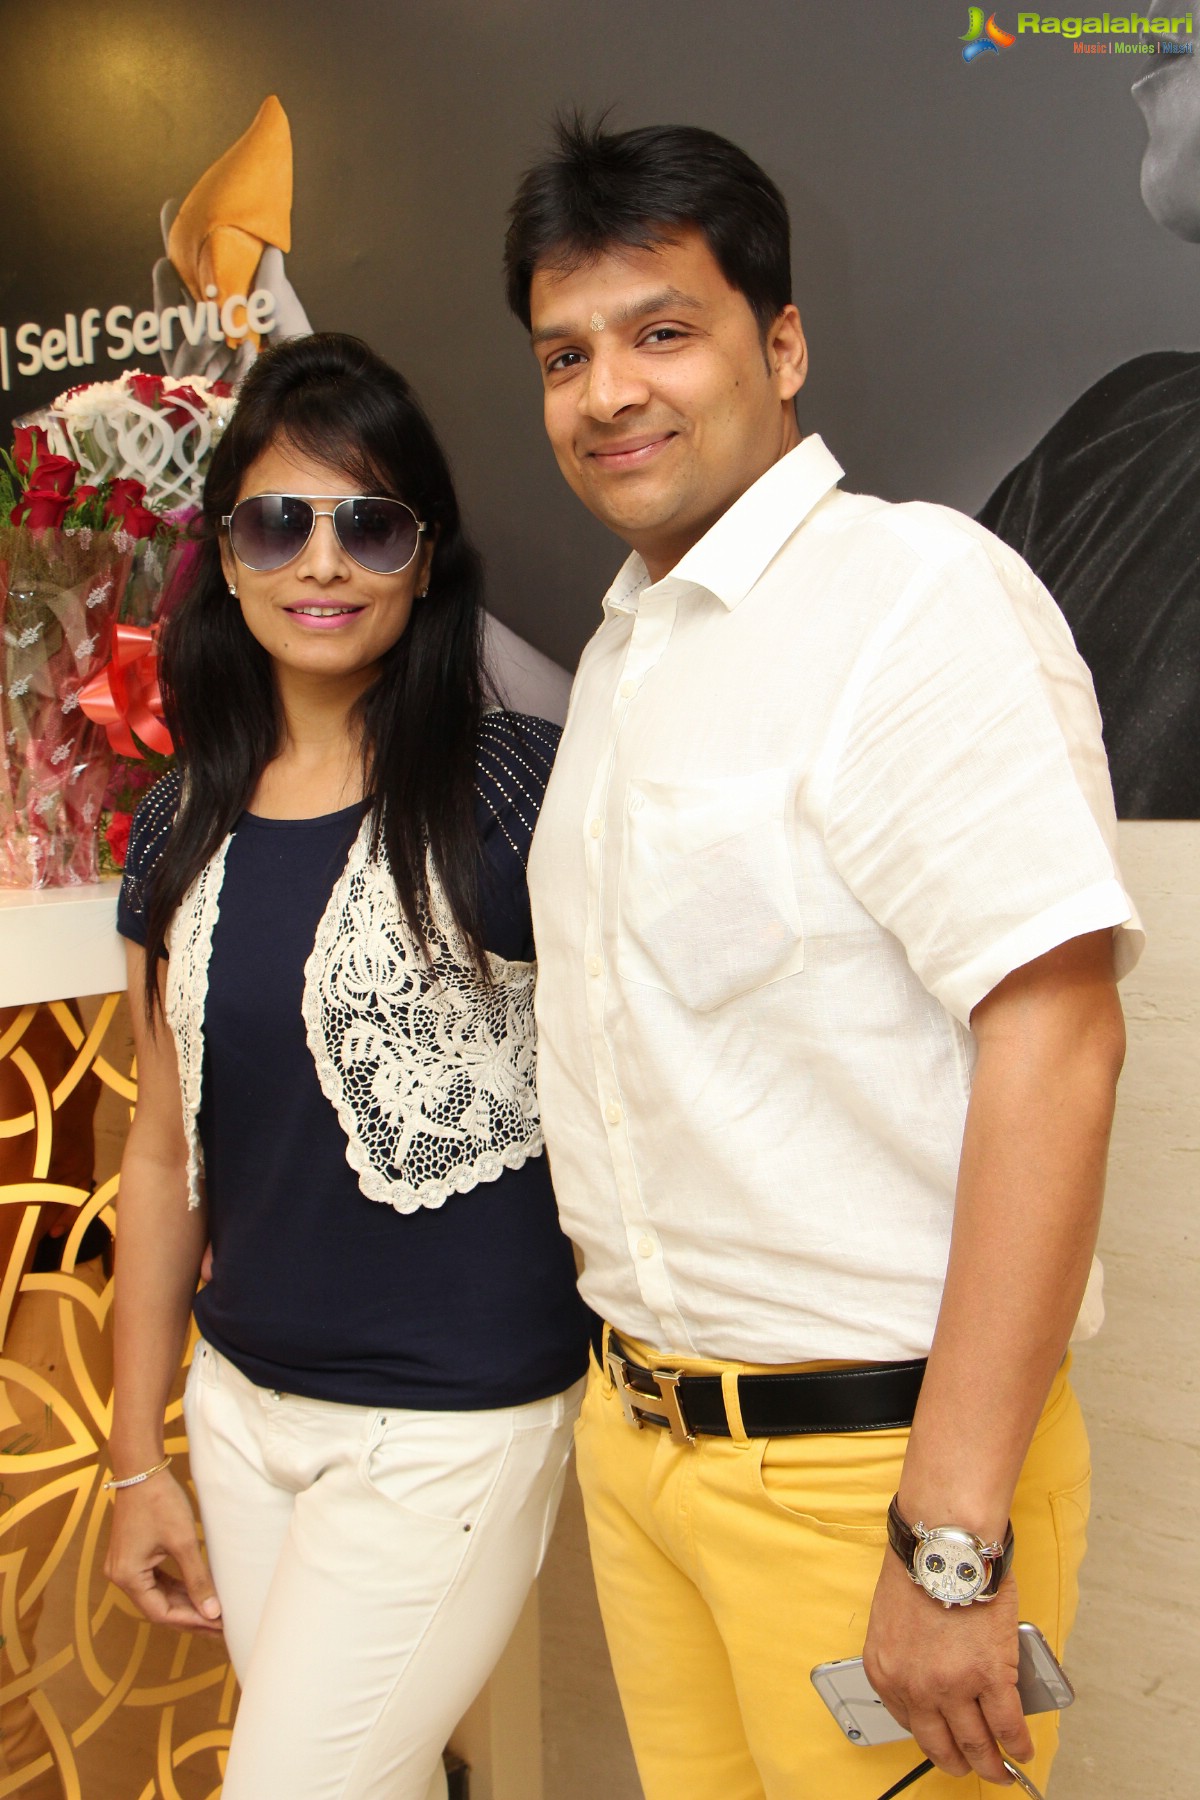 The Soft Launch of Bikanervala at Doshi Square, Hyderabad